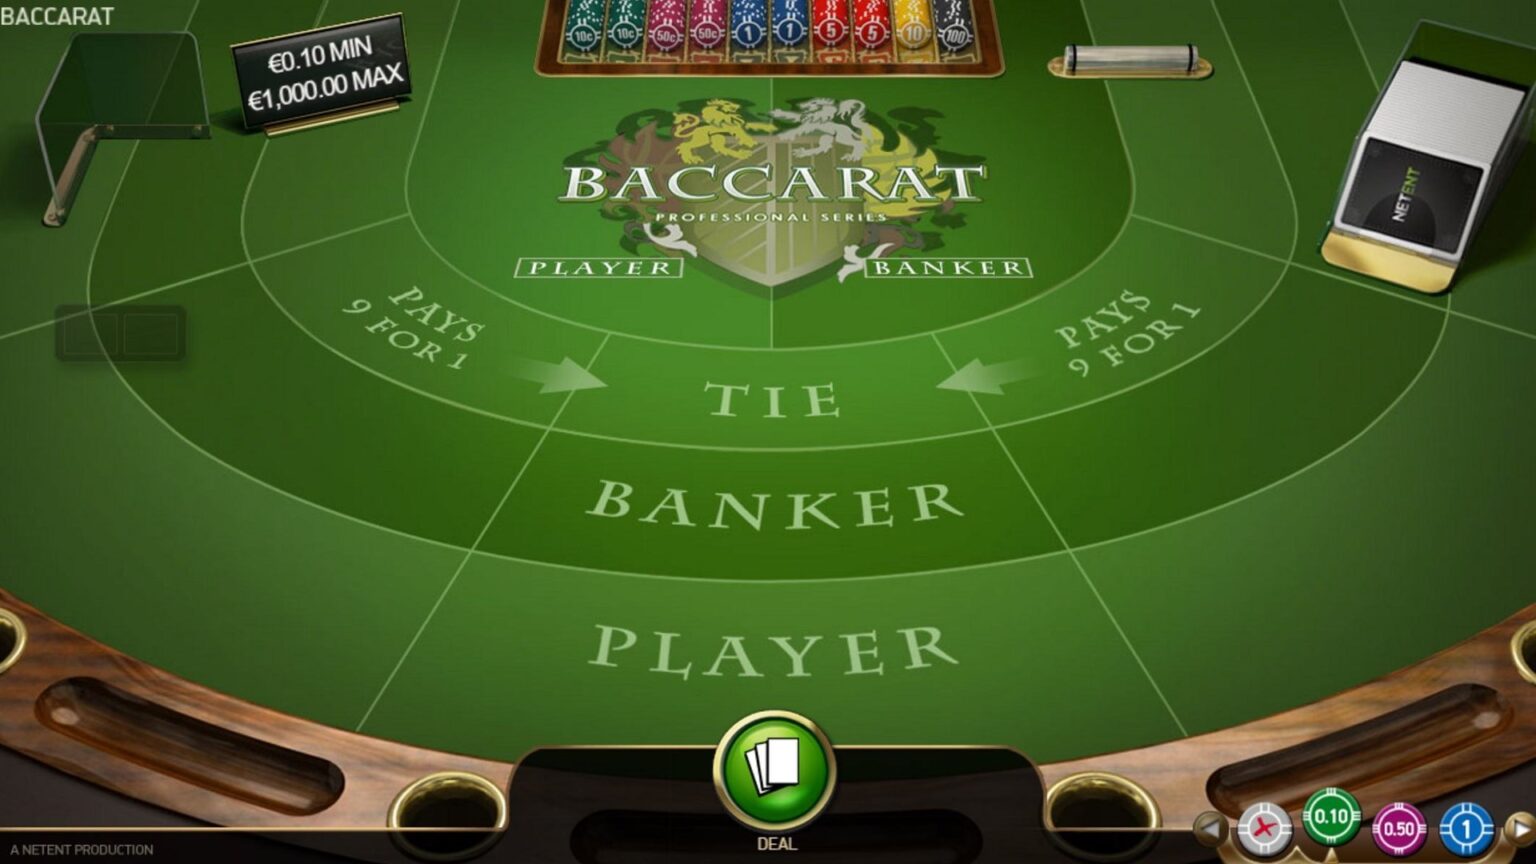 Few online gambling games are as fun as a baccarat tournament. Here are some tips on how to win a baccarat tournament with ease.